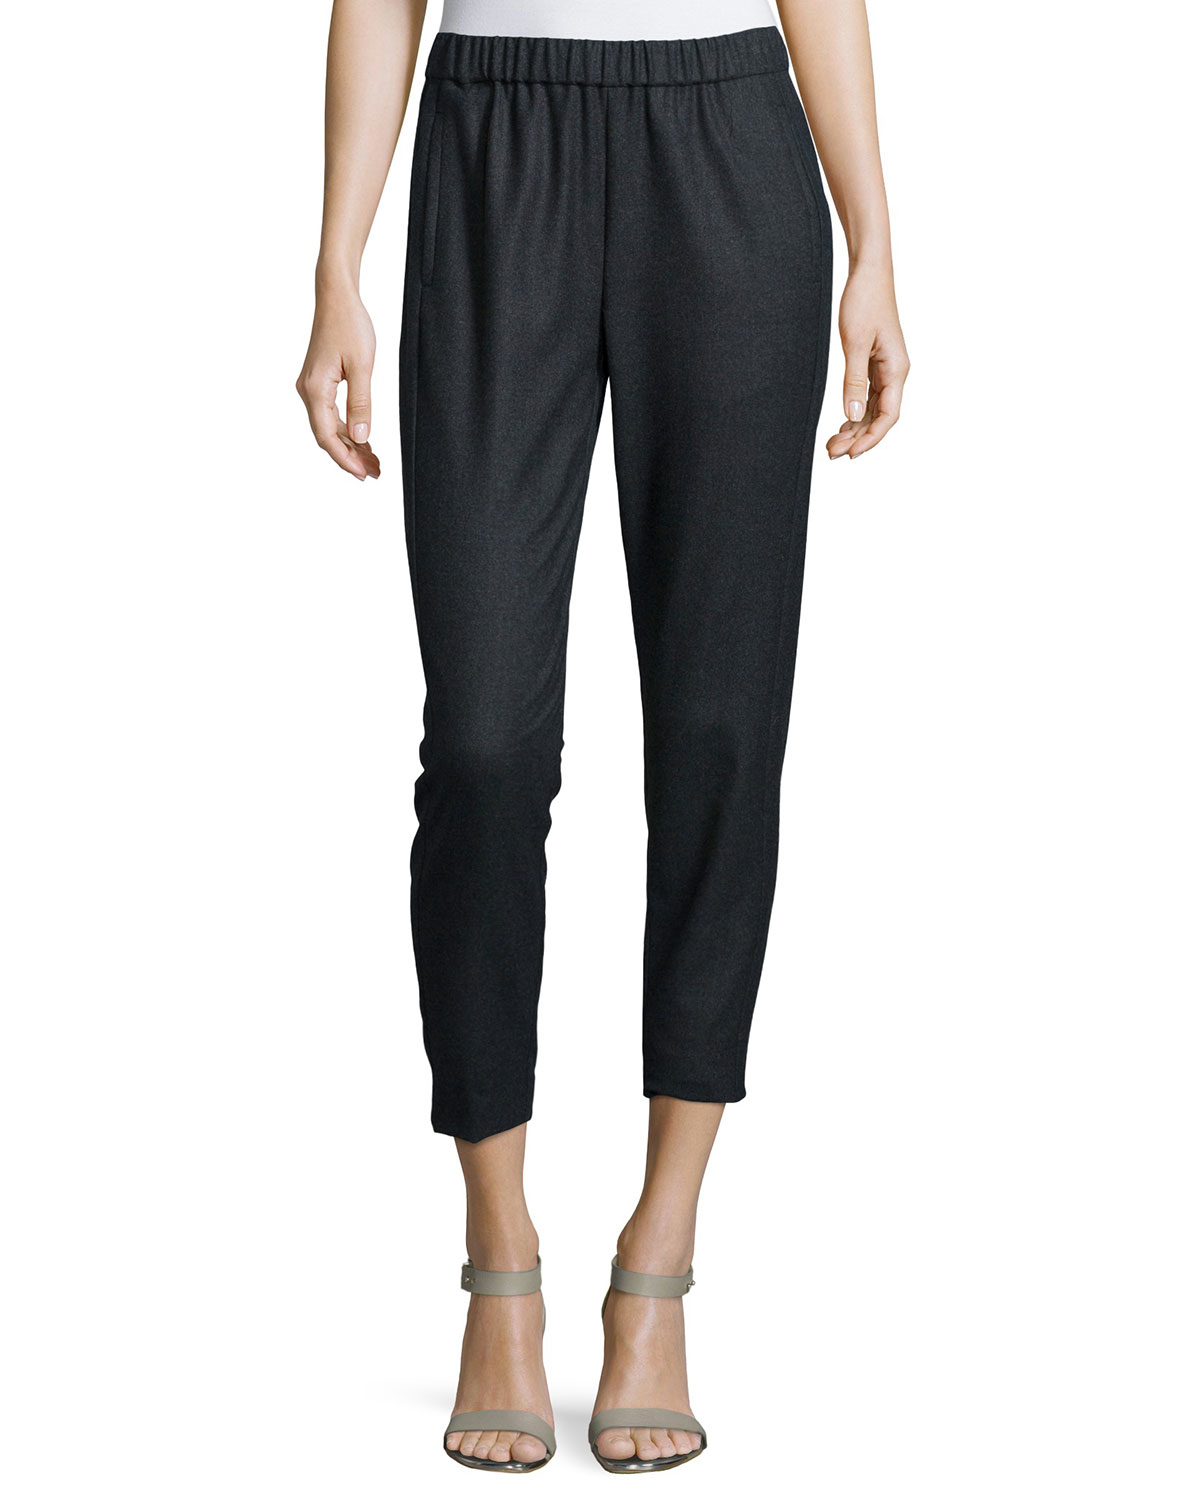 Lyst - Theory Thorene Cropped Pants in Black